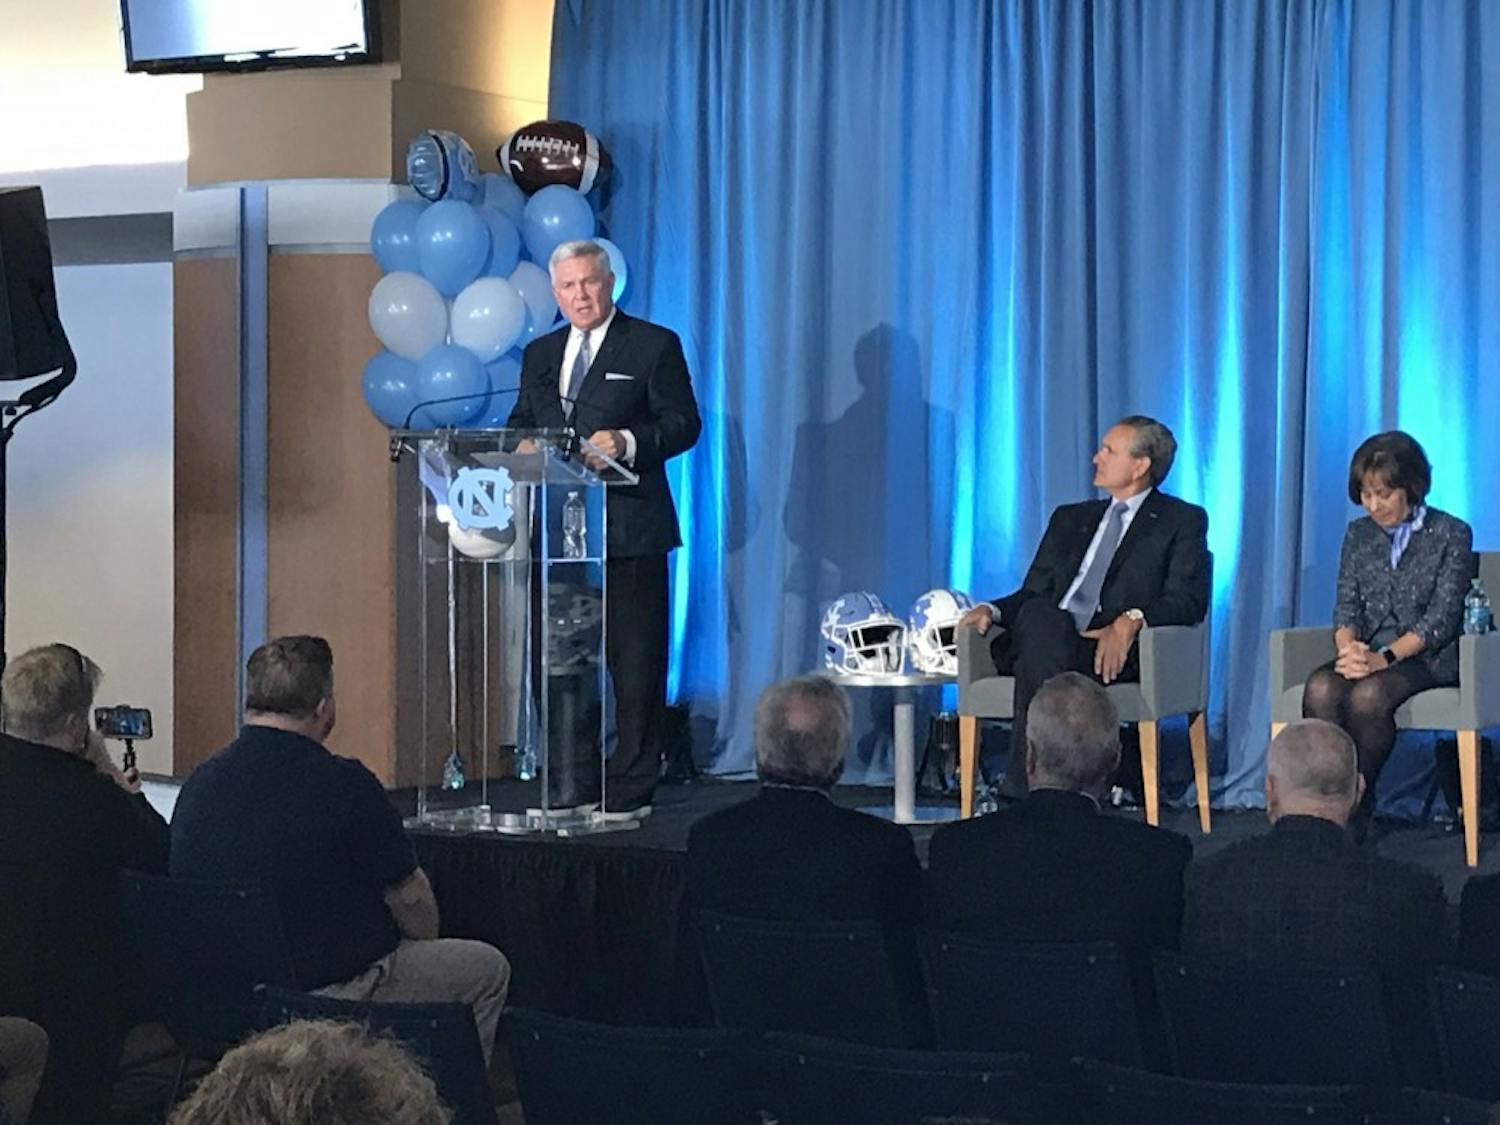 UNC head coach Mack Brown addresses the media at his introductory press conference on the third floor of the Loudermilk Center for Excellence on Nov. 27, 2018. Director of athletics Bubba Cunningham and Chancellor Carol Folt look on beside him.